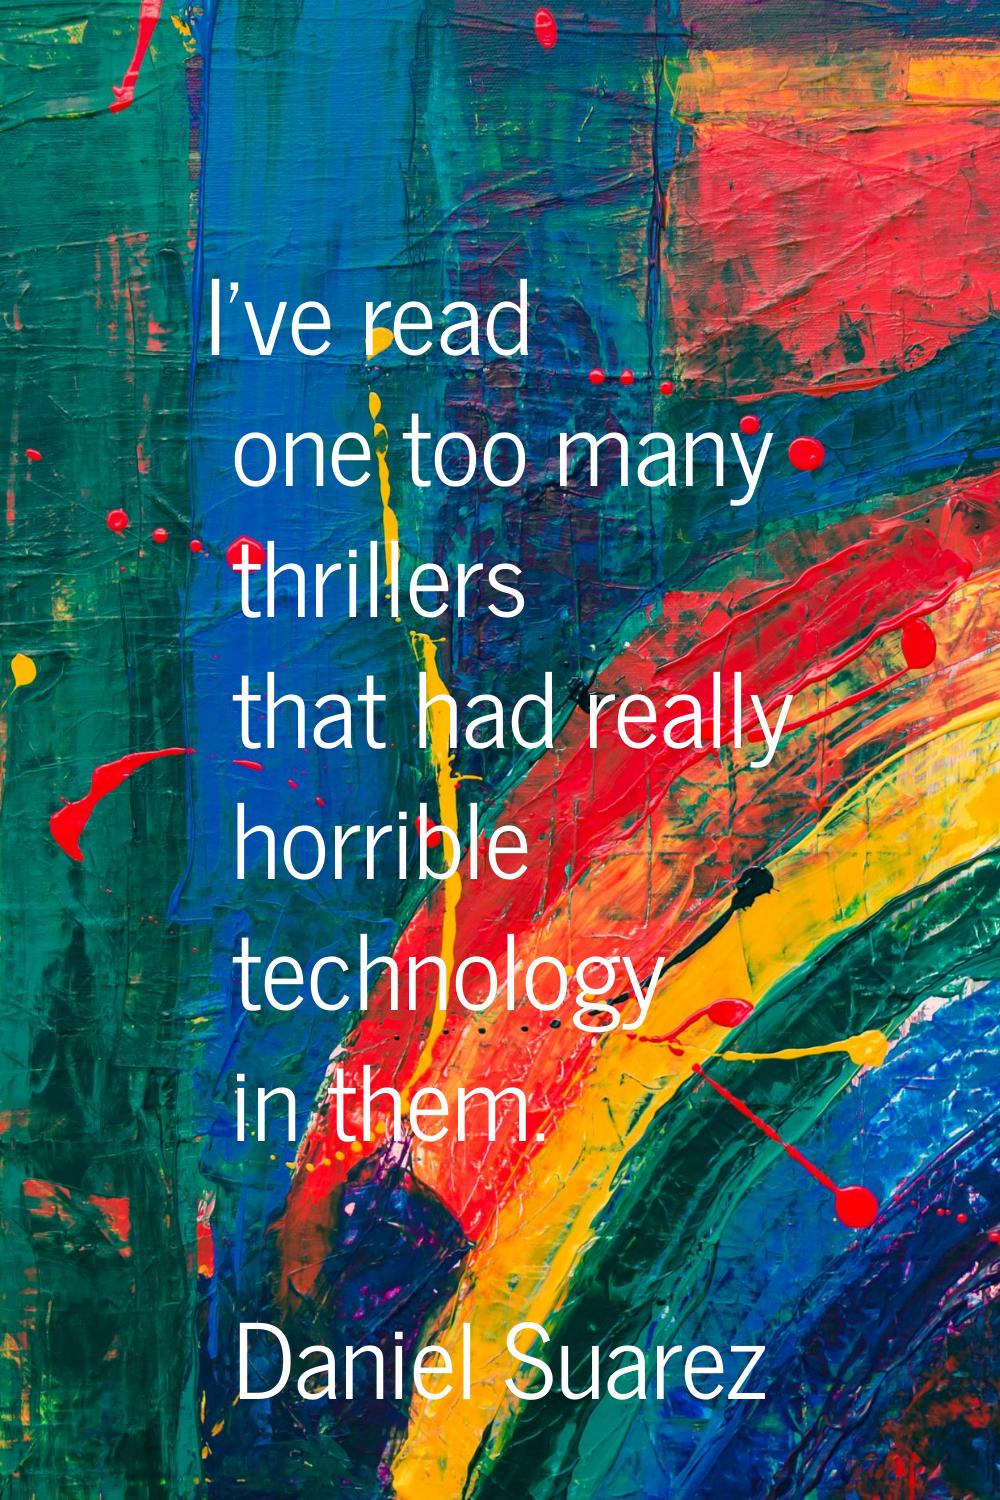 I've read one too many thrillers that had really horrible technology in them.